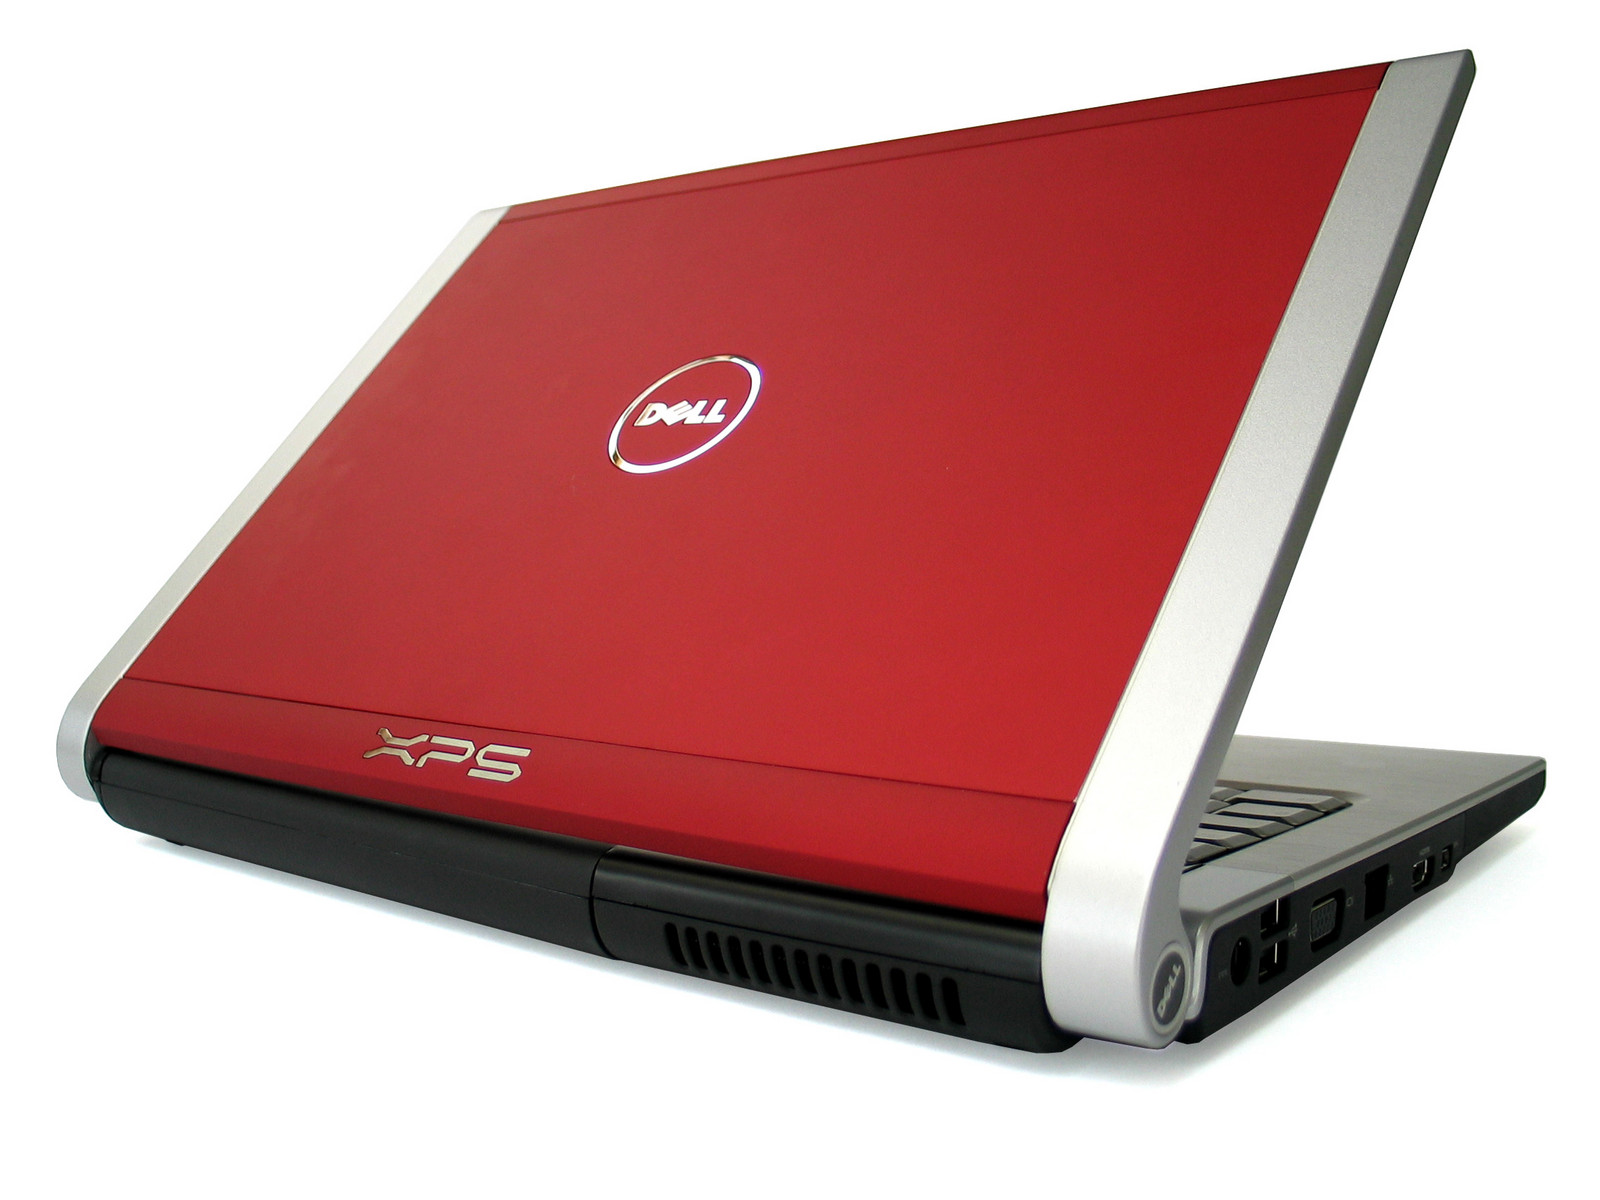 Dell Xps M1530 Notebookcheck External Res